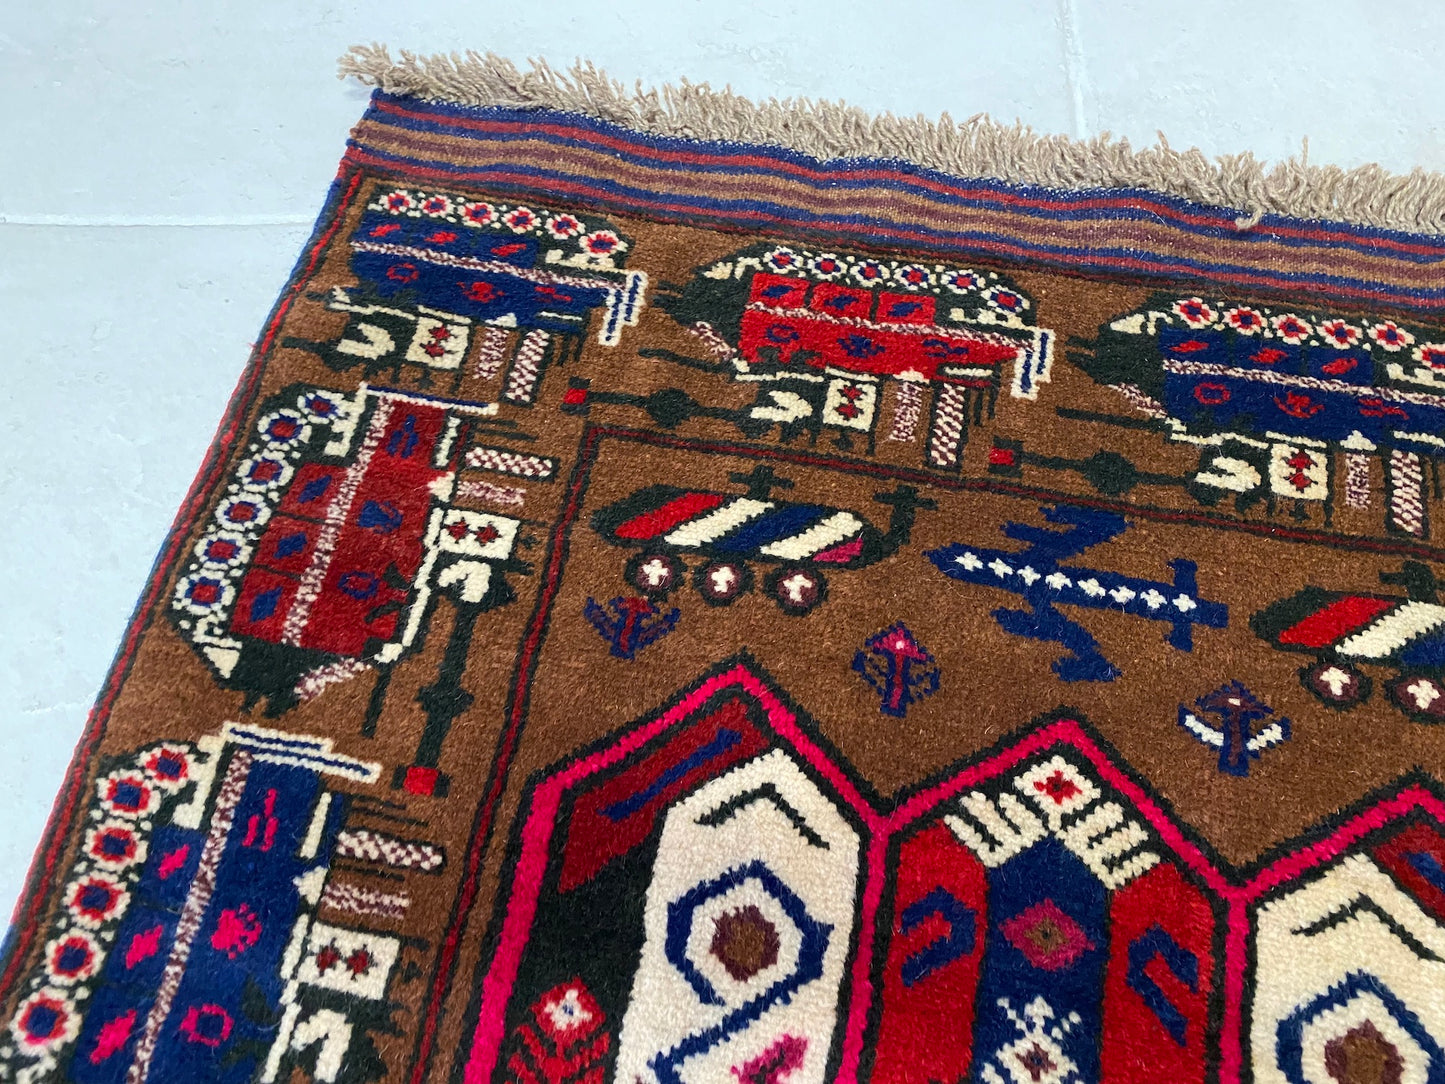 Hand woven Afghan War Rug with tan base and vibrant blue, red and cream tanks and symbols throughout - Available from King Kennedy Rugs Los Angeles